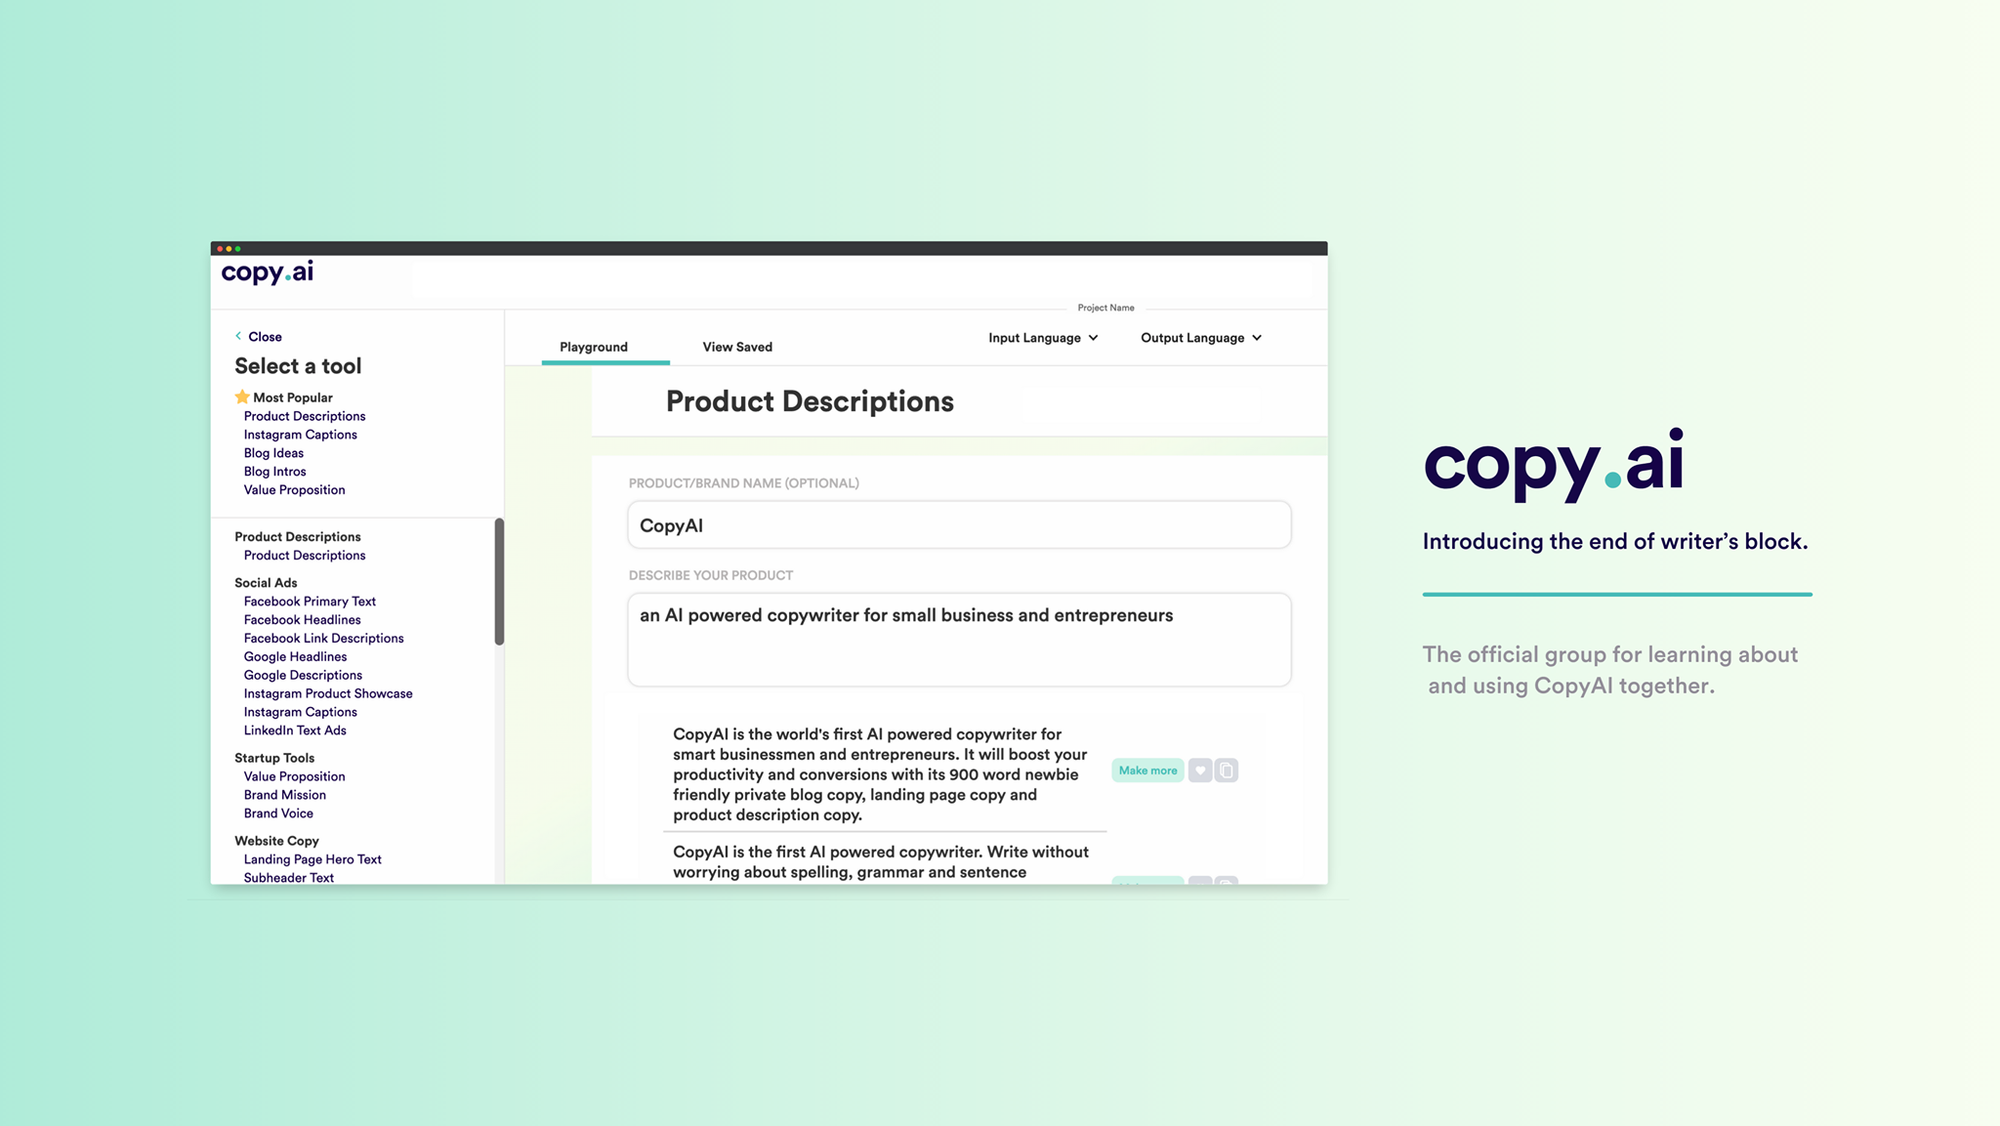 Open the CopyAI app to get started with product descriptions